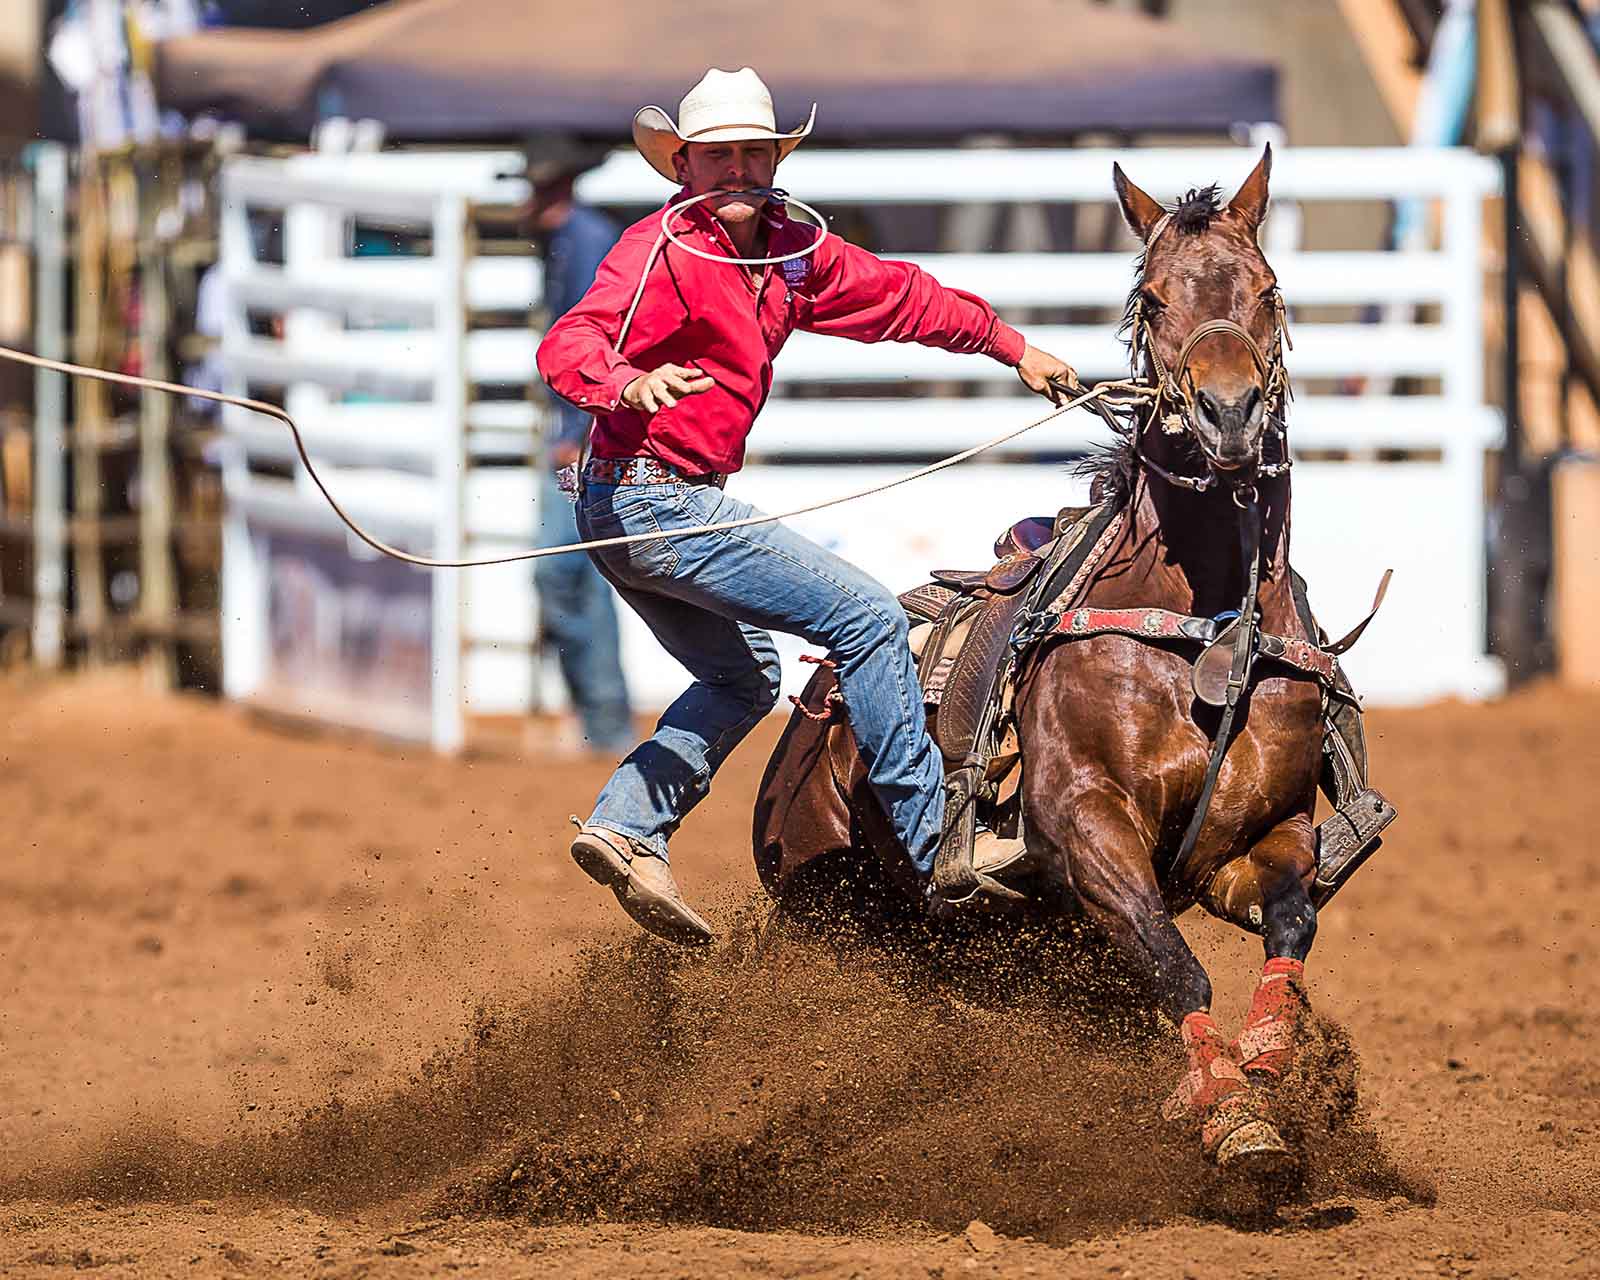 Mount Isa Rodeo, Outback Queensland | Epic outback guide